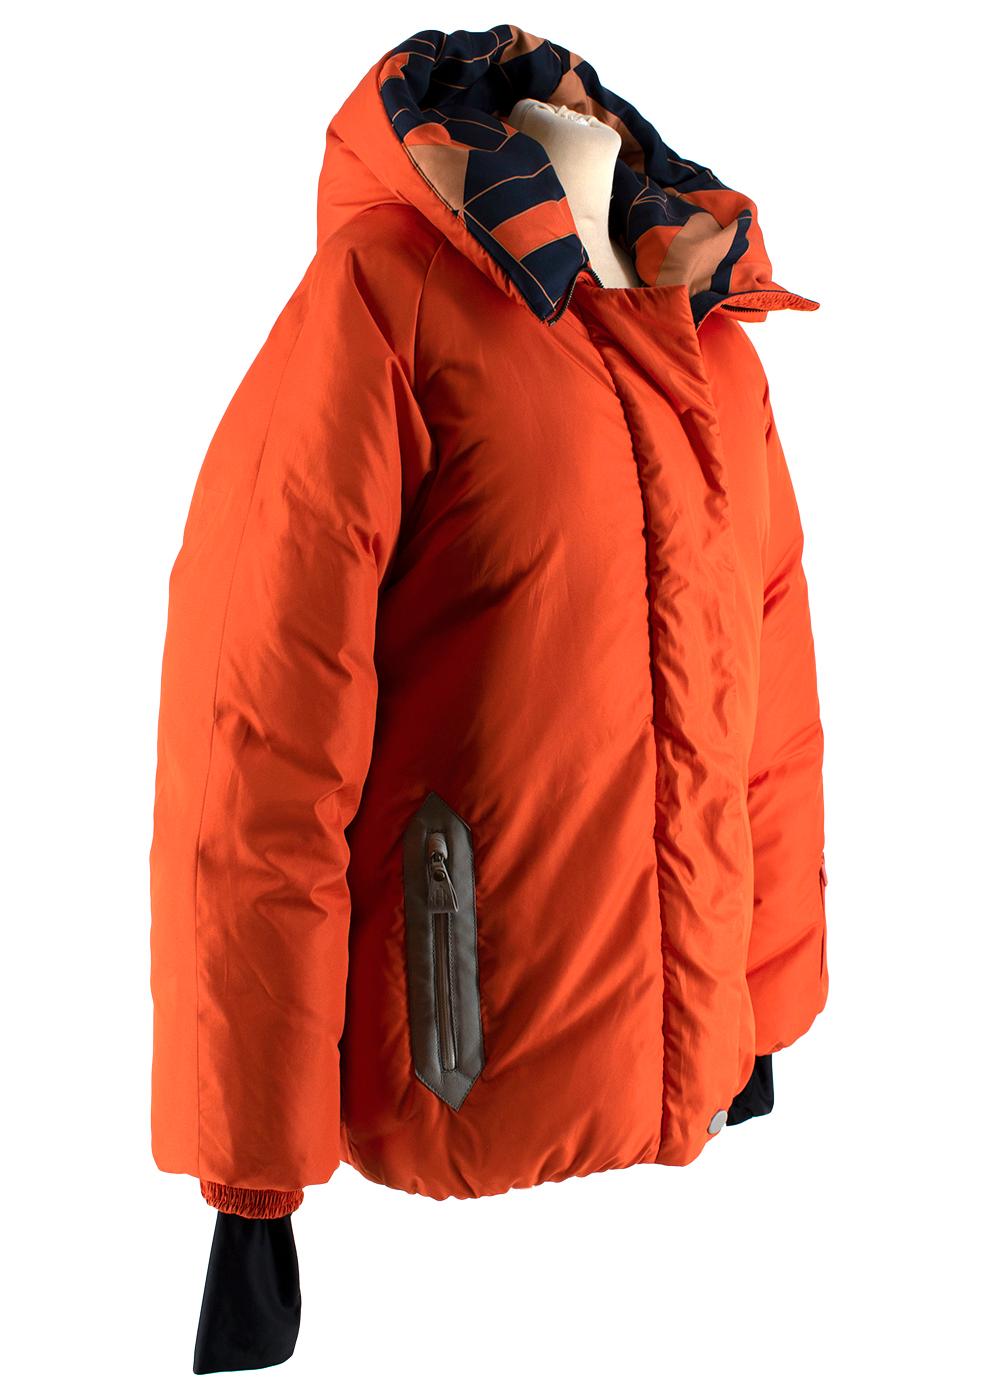 Hermes Oversize Hooded Orange Puffer Coat with Scarf Print Lining 40

- Patterned Lining 
- Oversized Hood 
- Grey Veau-Calfskin Leather Zip Trim
- Centre Full Length Zip and Button Fastening 
- Small Sleeve Zip Pocket 
- One Interior Pocket